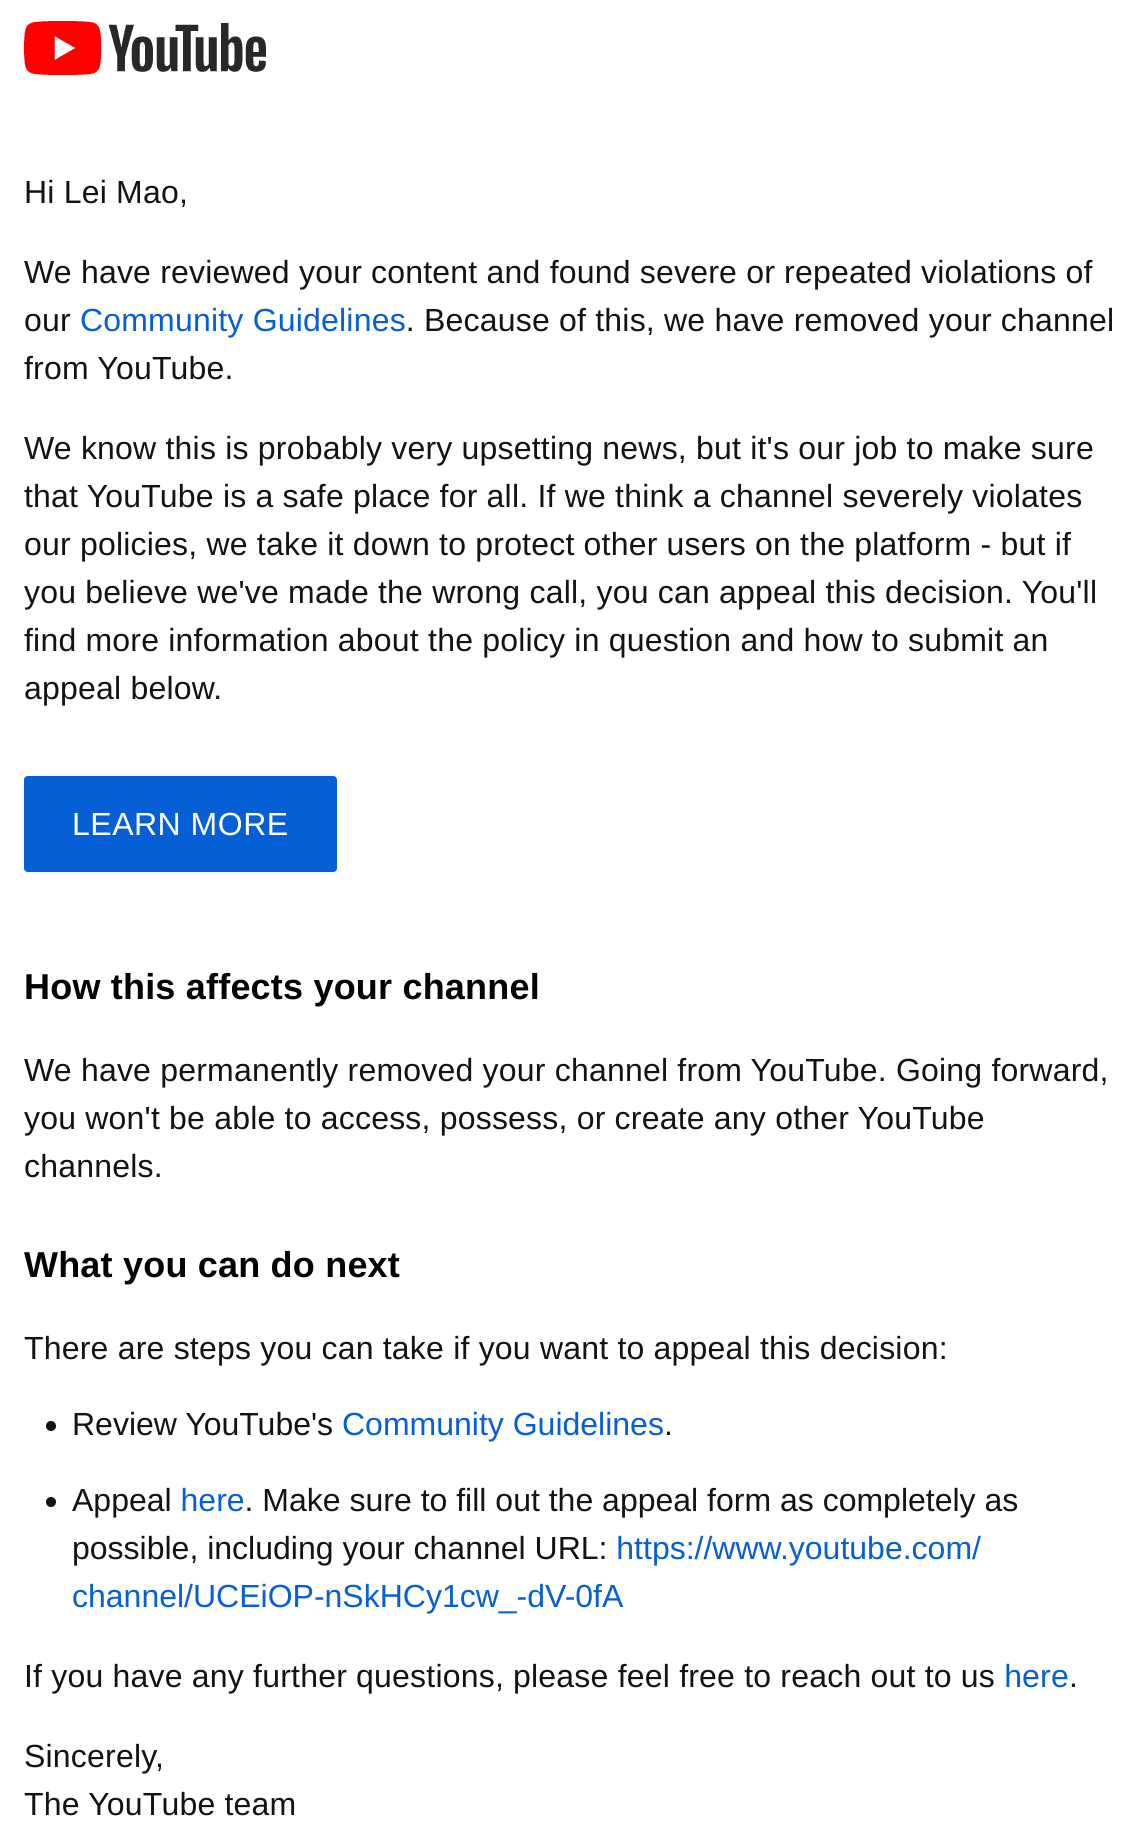 Why is YouTube removing my channel?